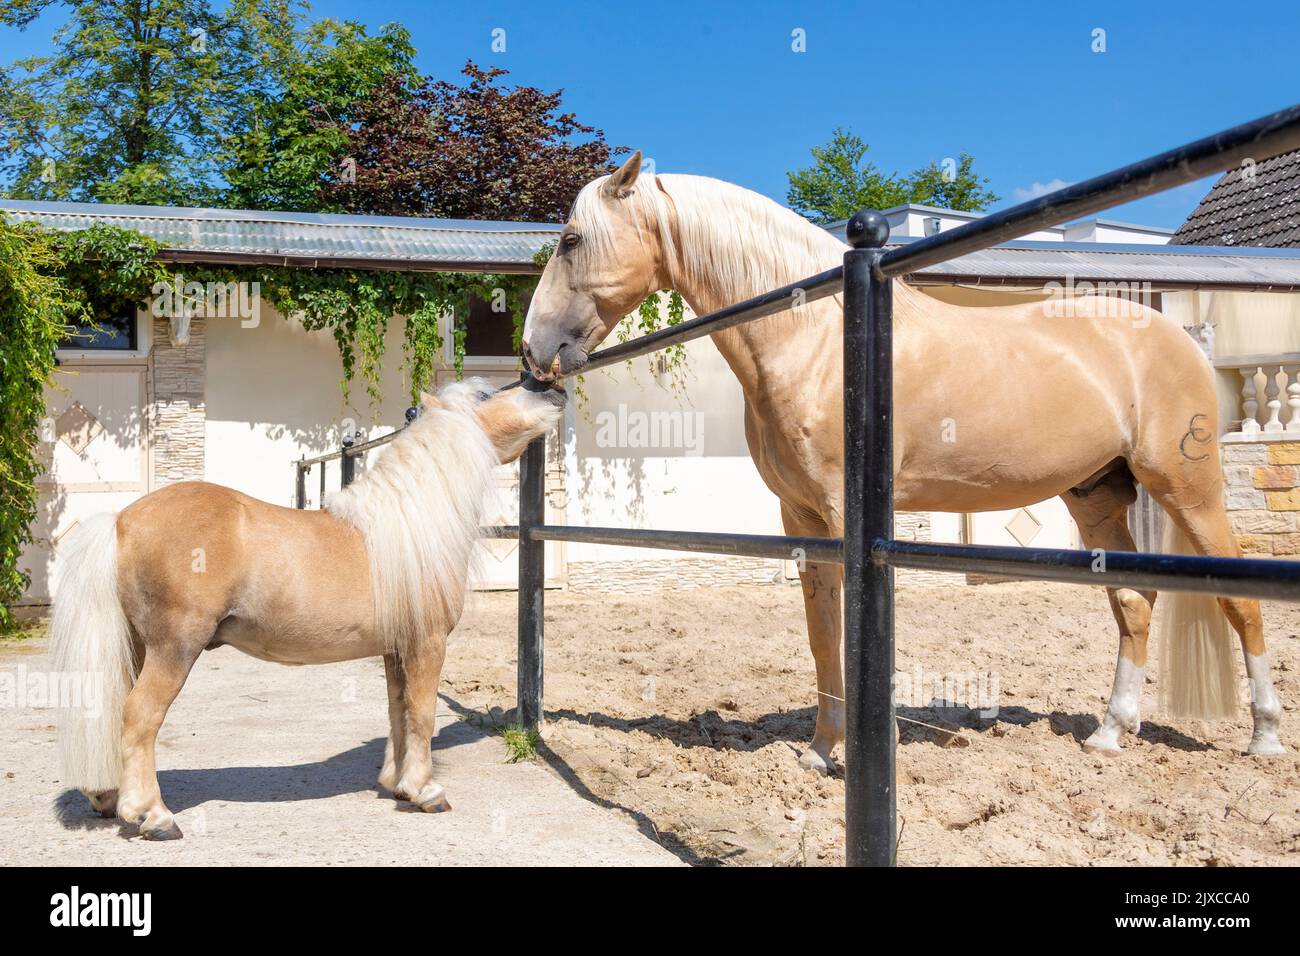 The palomino colored stallion Indigo sniffs a Lusitano of the same color in a paddock. Germany Stock Photo